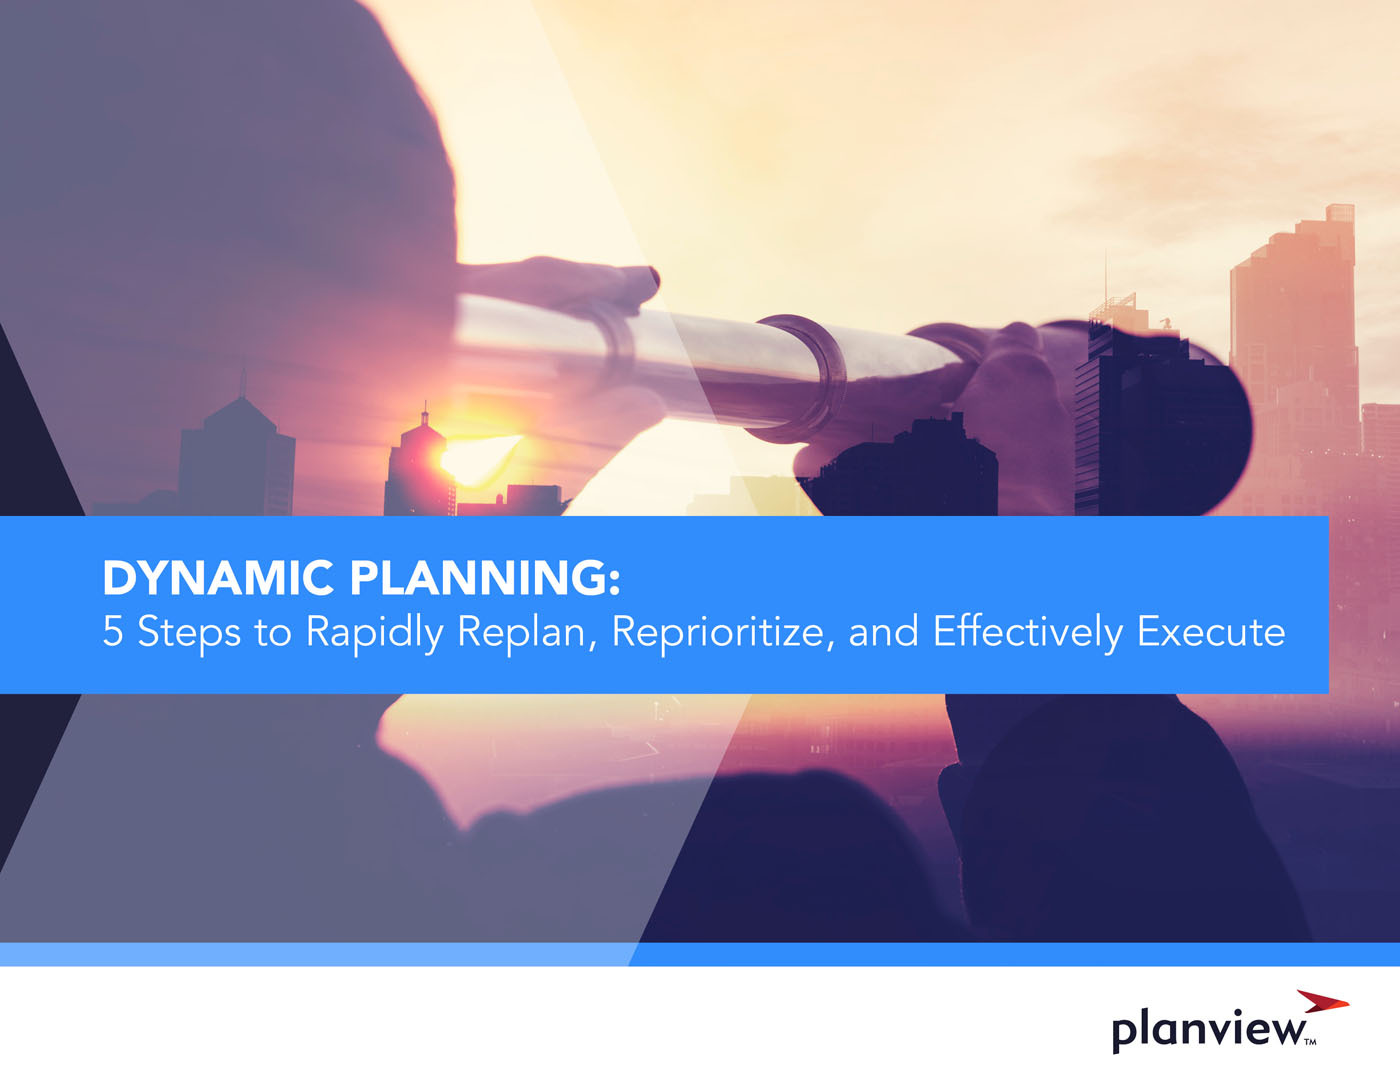 DYNAMIC PLANNING: 5 Steps to Rapidly Replan, Reprioritize, and Effectively Execute